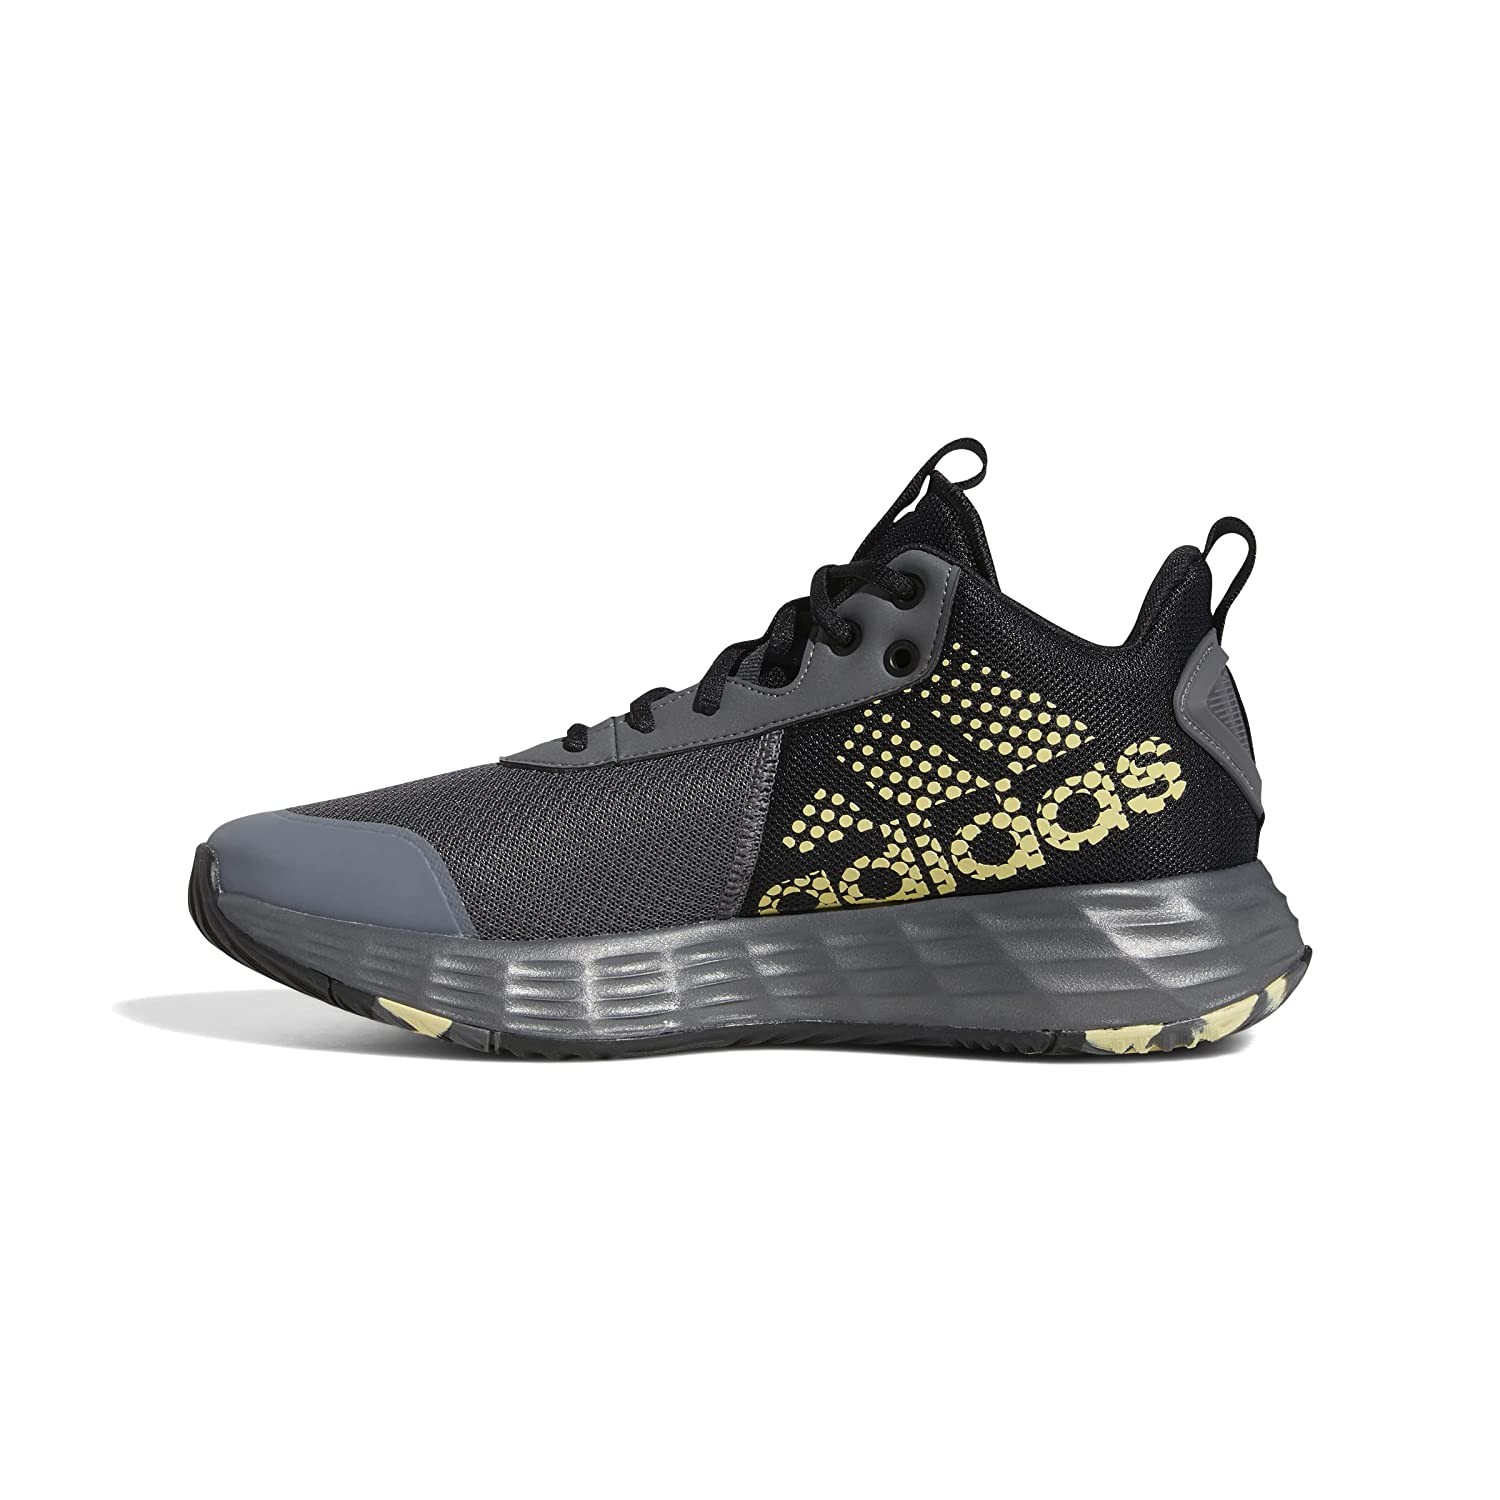 Adidas Mens Ownthegame 2.0 Shoes